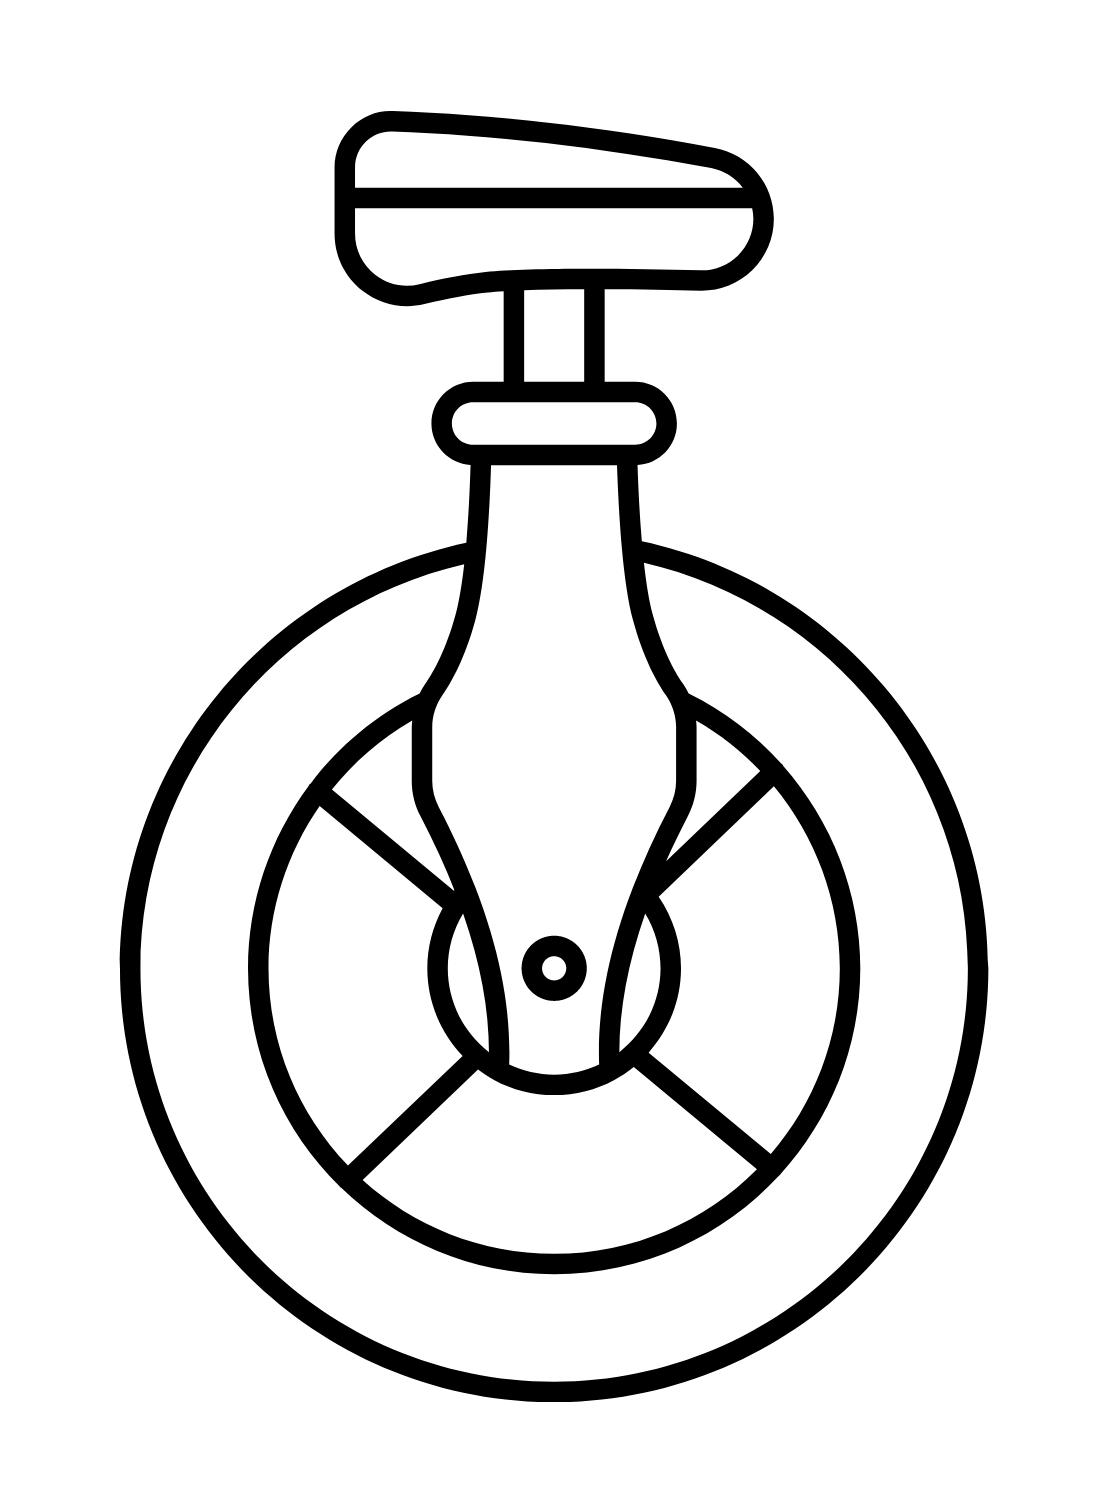 Bicycle Simple Coloring Page